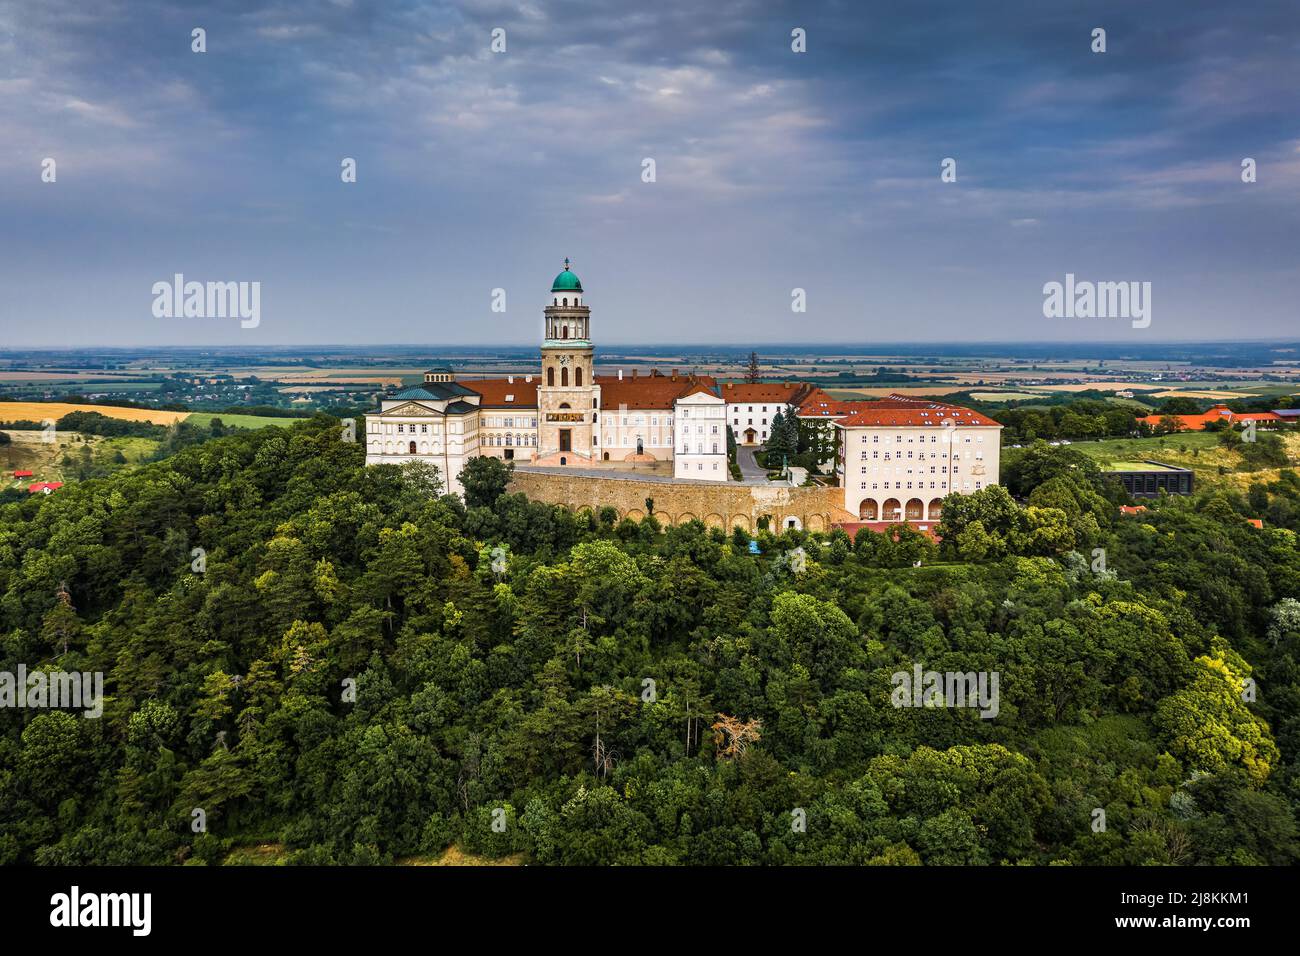 Pannonhalma, Hungary - Aerial view of the beautiful Millenary Benedictine Abbey of Pannonhalma (Pannonhalmi Apatsag) with blue sky and green summer fo Stock Photo